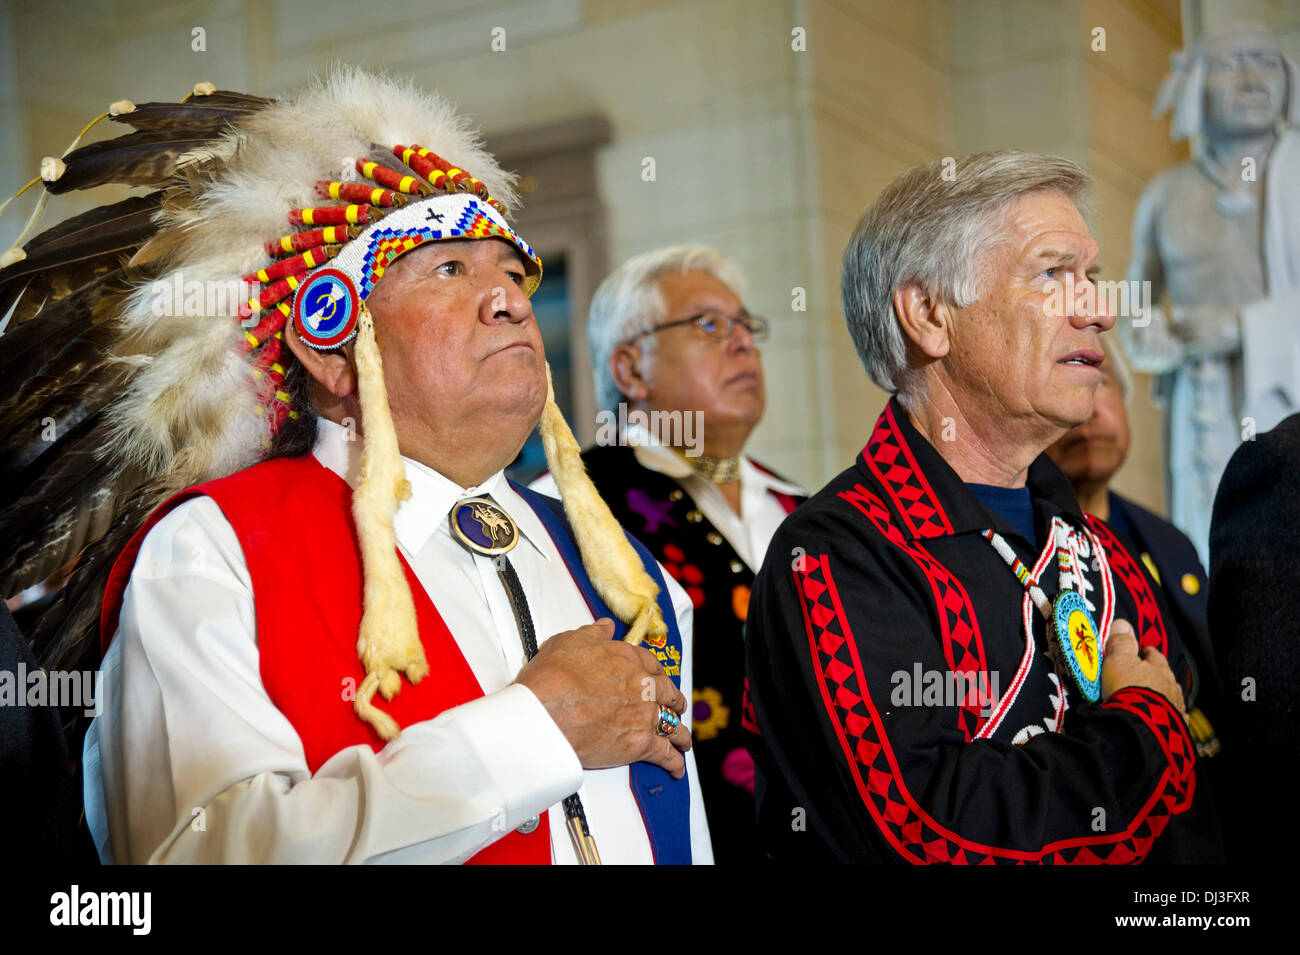 Representatives of Native American tribes stand during the Congressional Gold Medal Ceremony Honoring Native American Code Talkers in Emancipation Hall at the US Capitol Nov. 20, 2013 in Washington, DC . The Congressional Gold Medal was awarded to Native American code talkers for their valor and dedication during World War I and World War II. Stock Photo